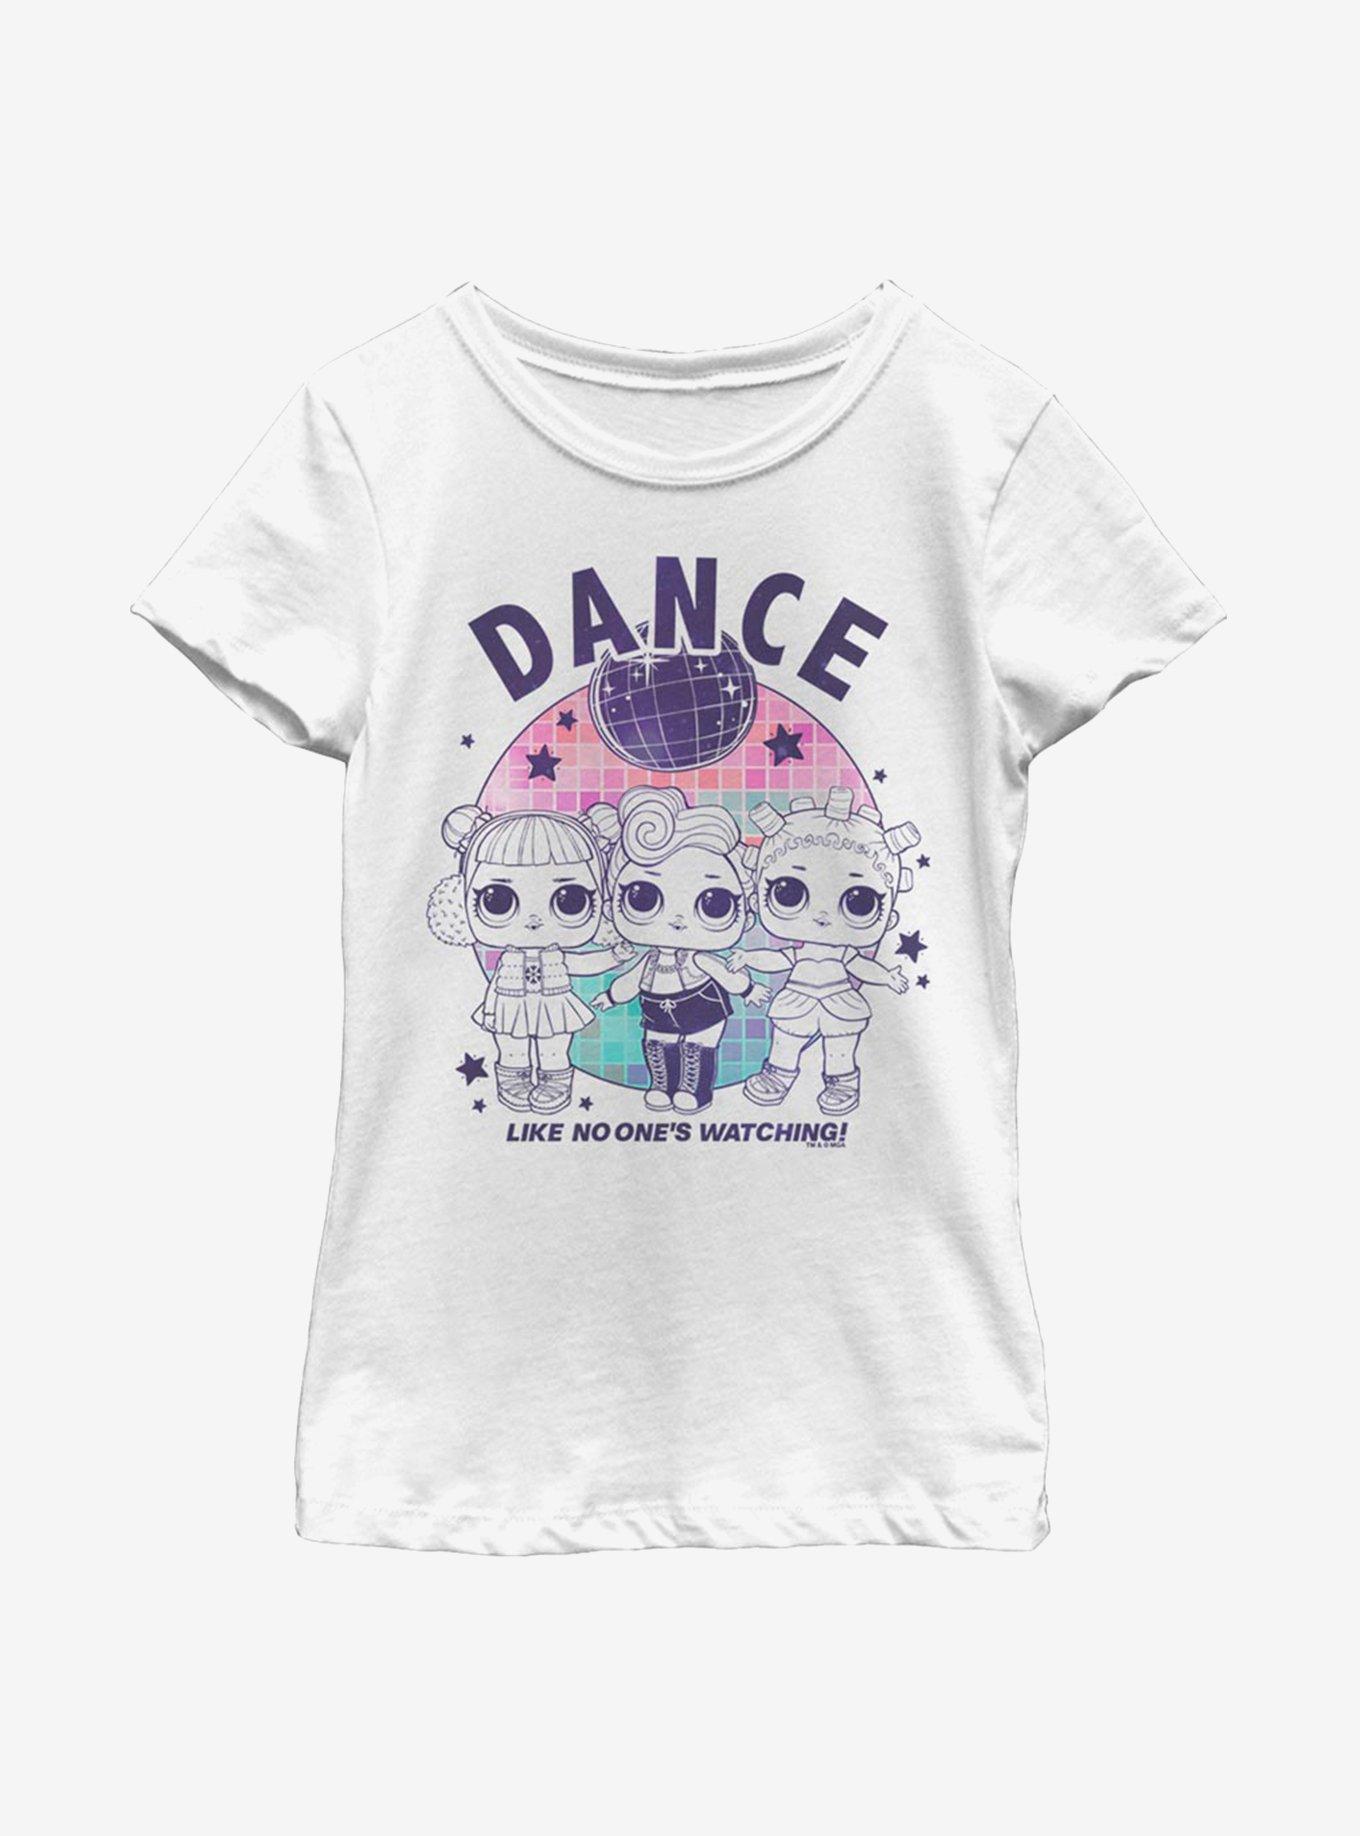 L.O.L. Surprise! Dance It Out Youth Girls T-Shirt, WHITE, hi-res